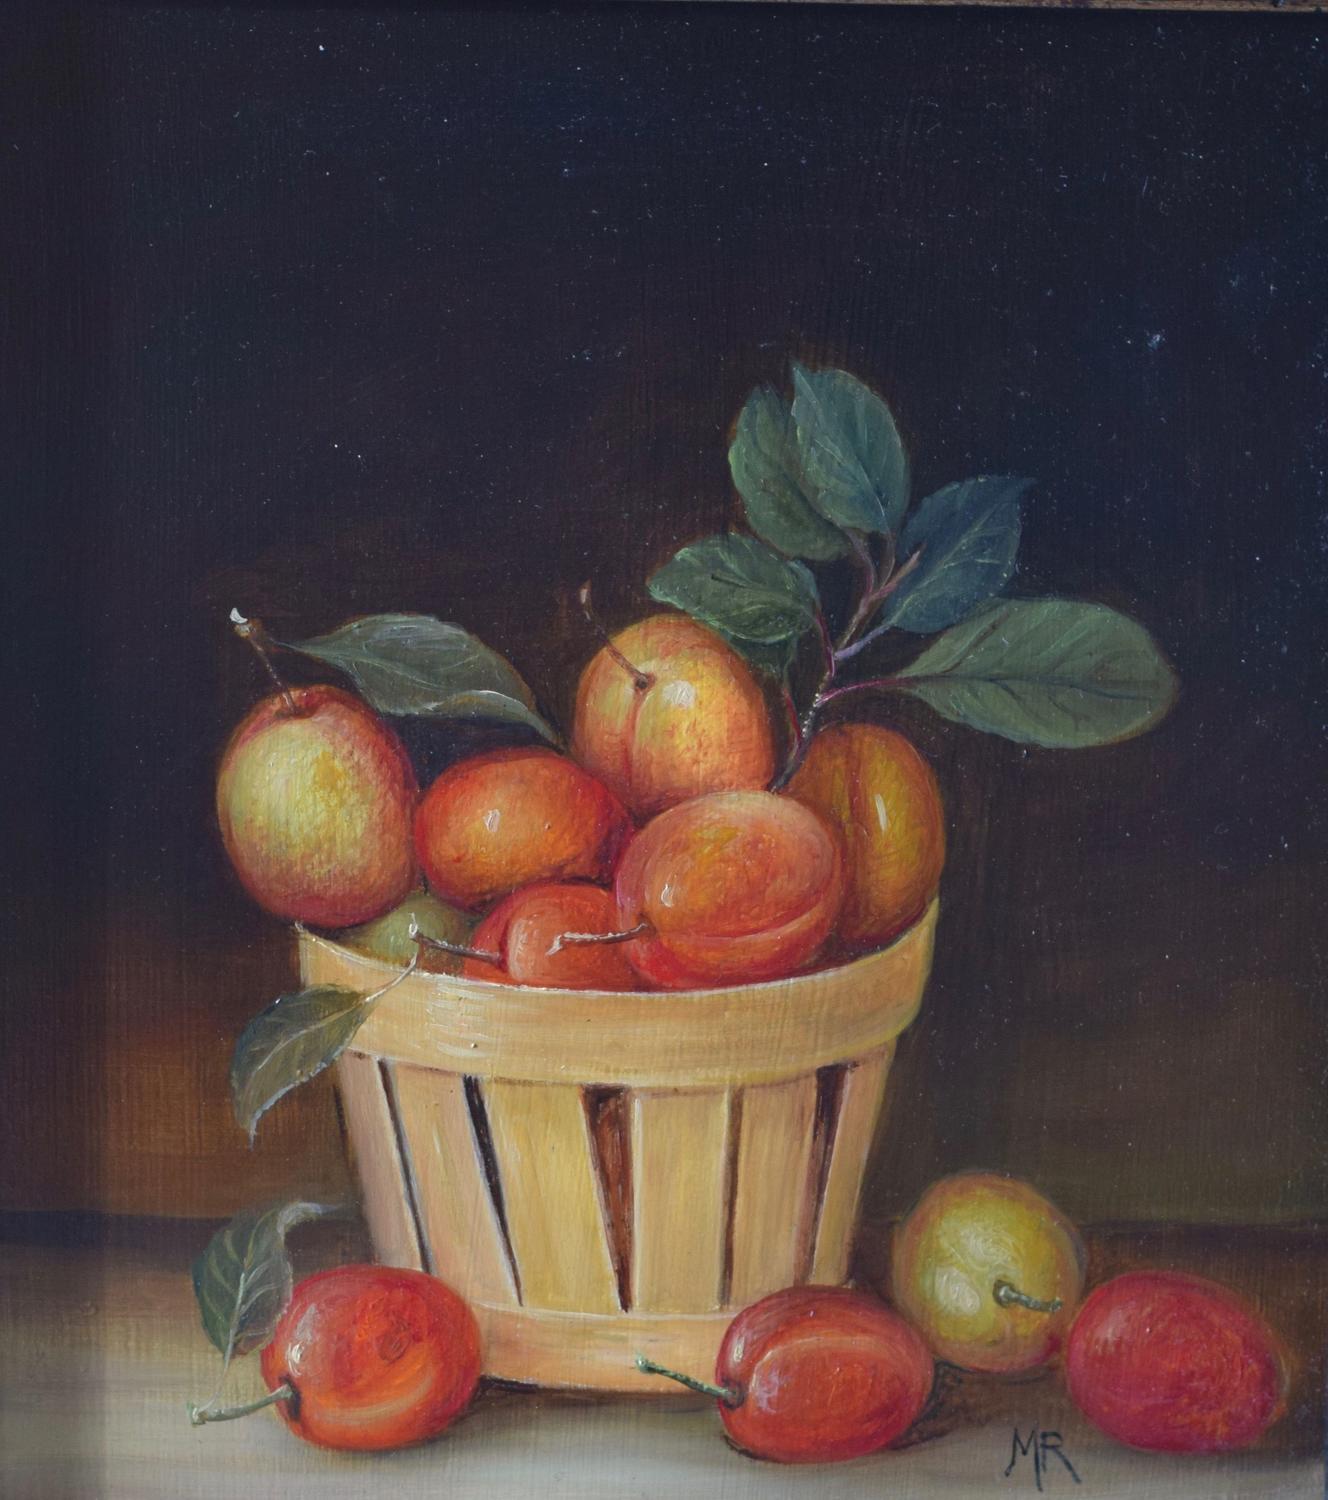 Basket of plums